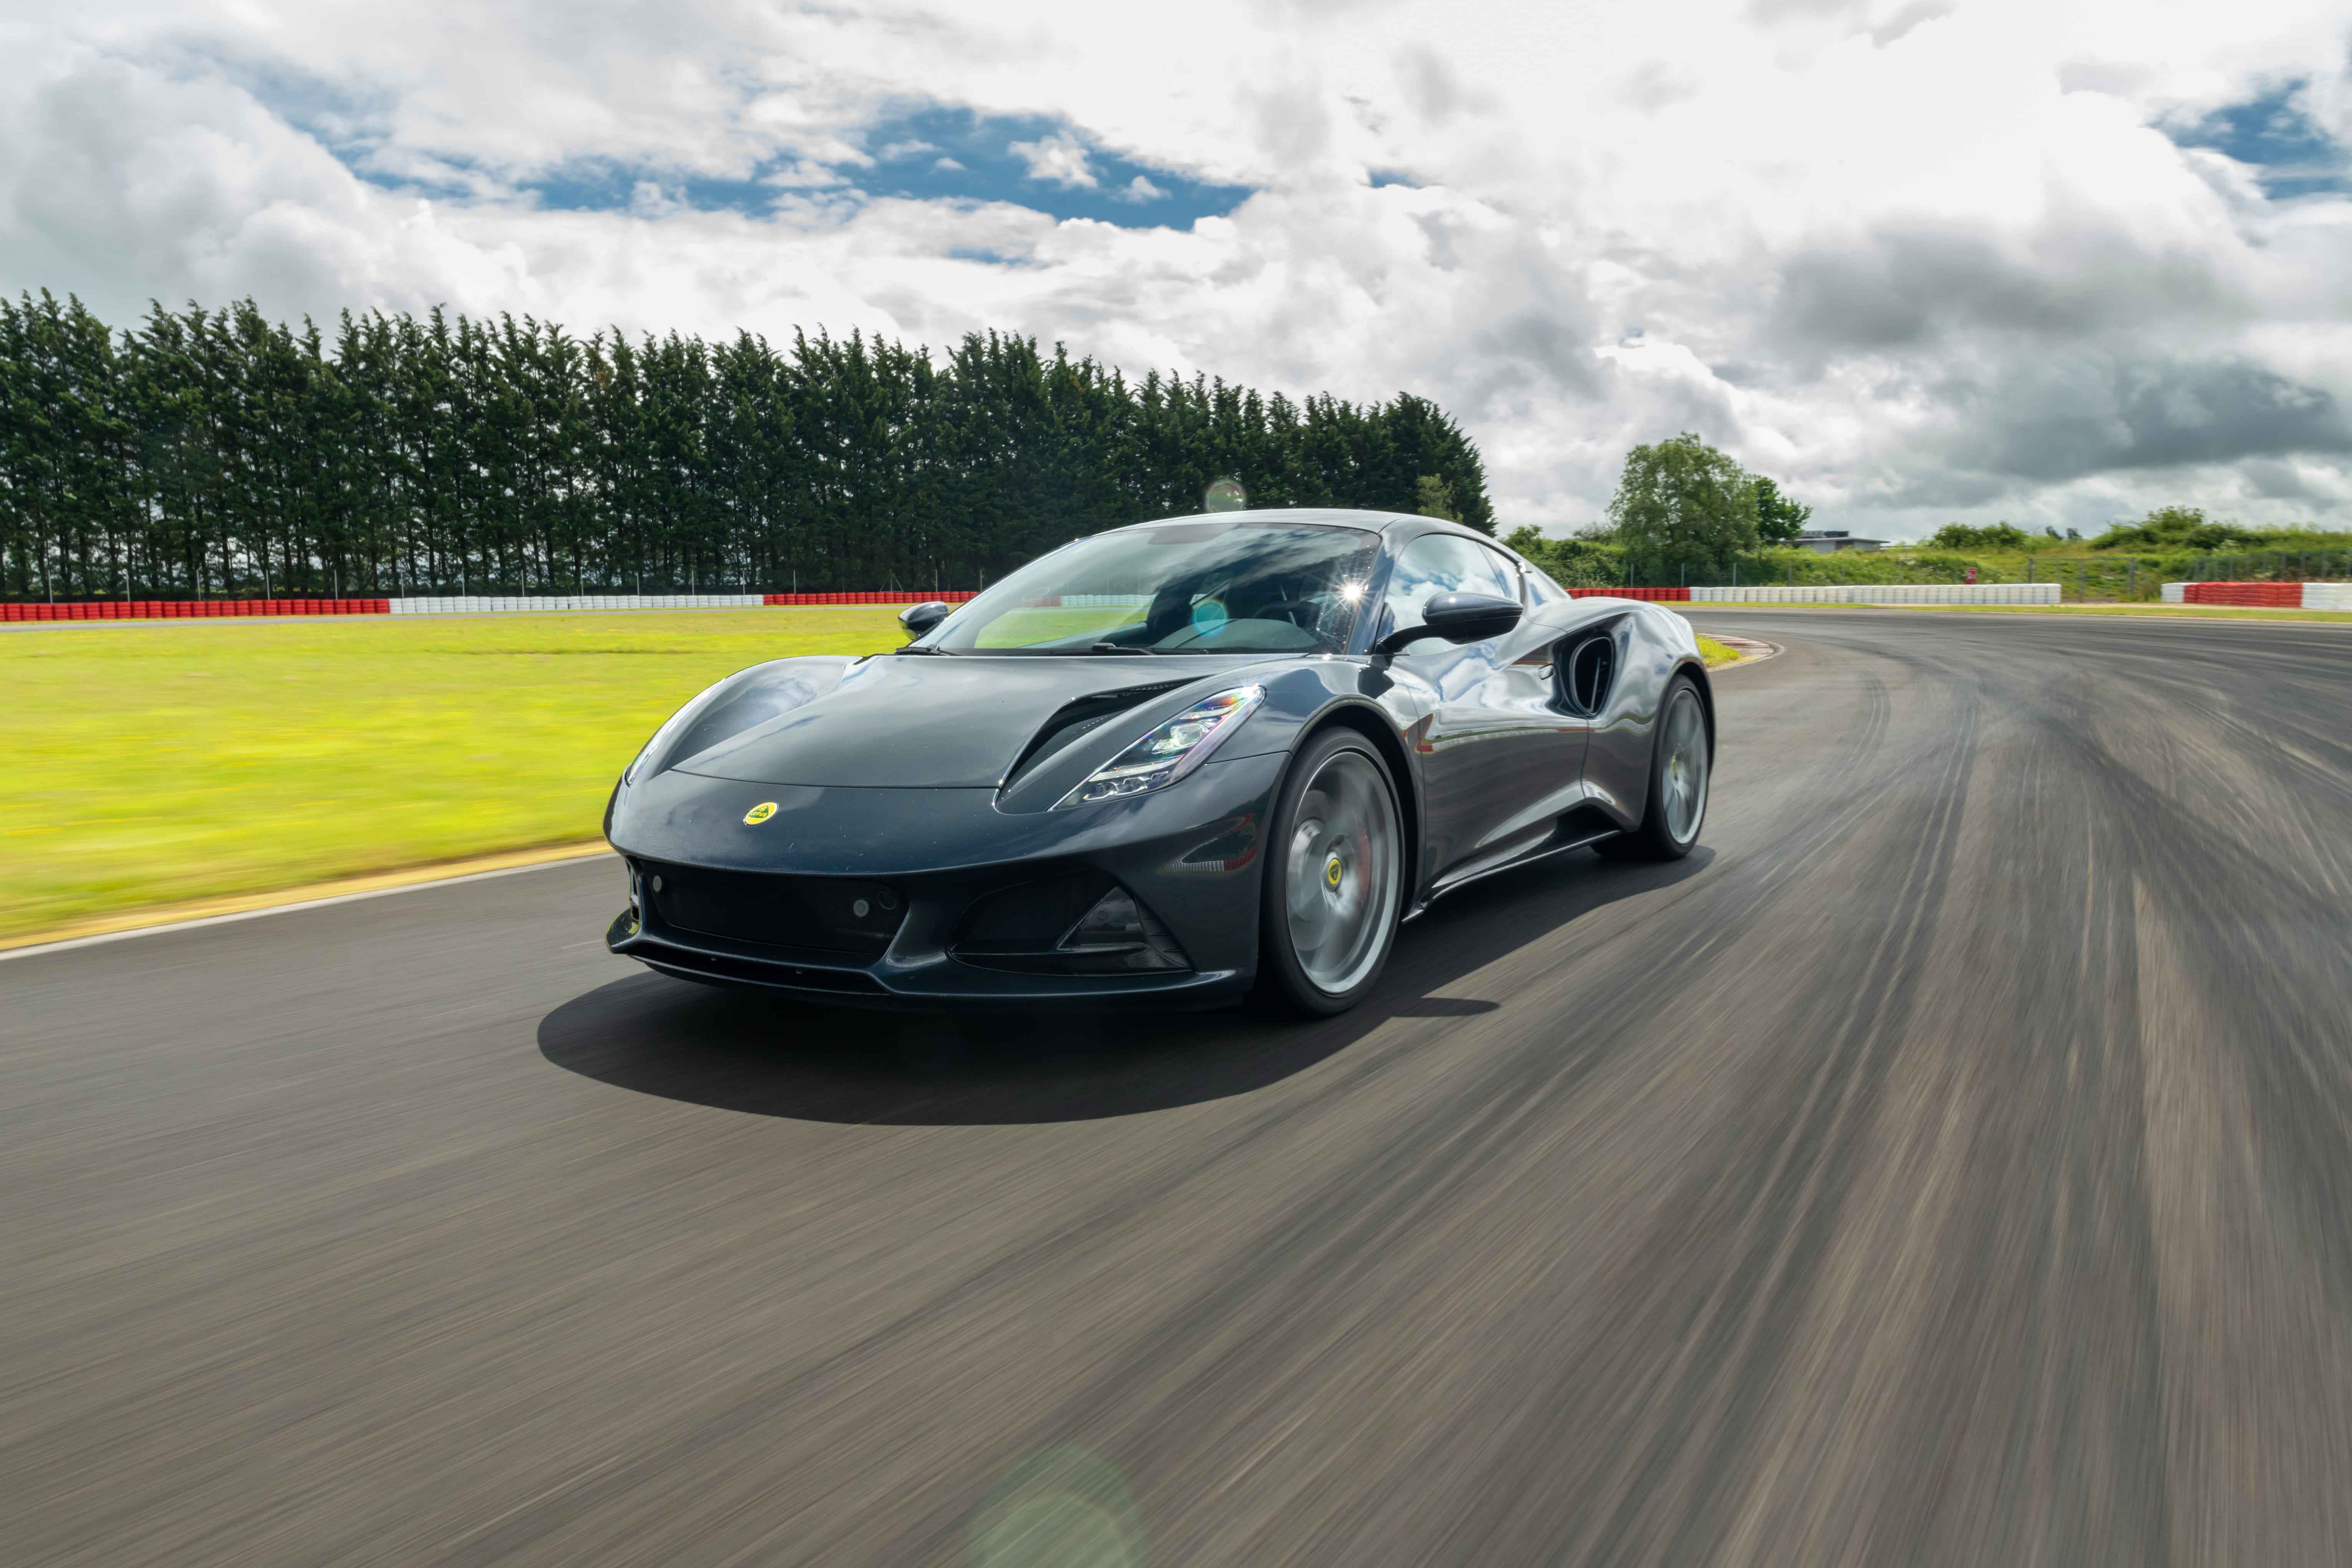 Lotus Emira to dazzle with dynamic debut at this weekend’s Goodwood Festival of Speed